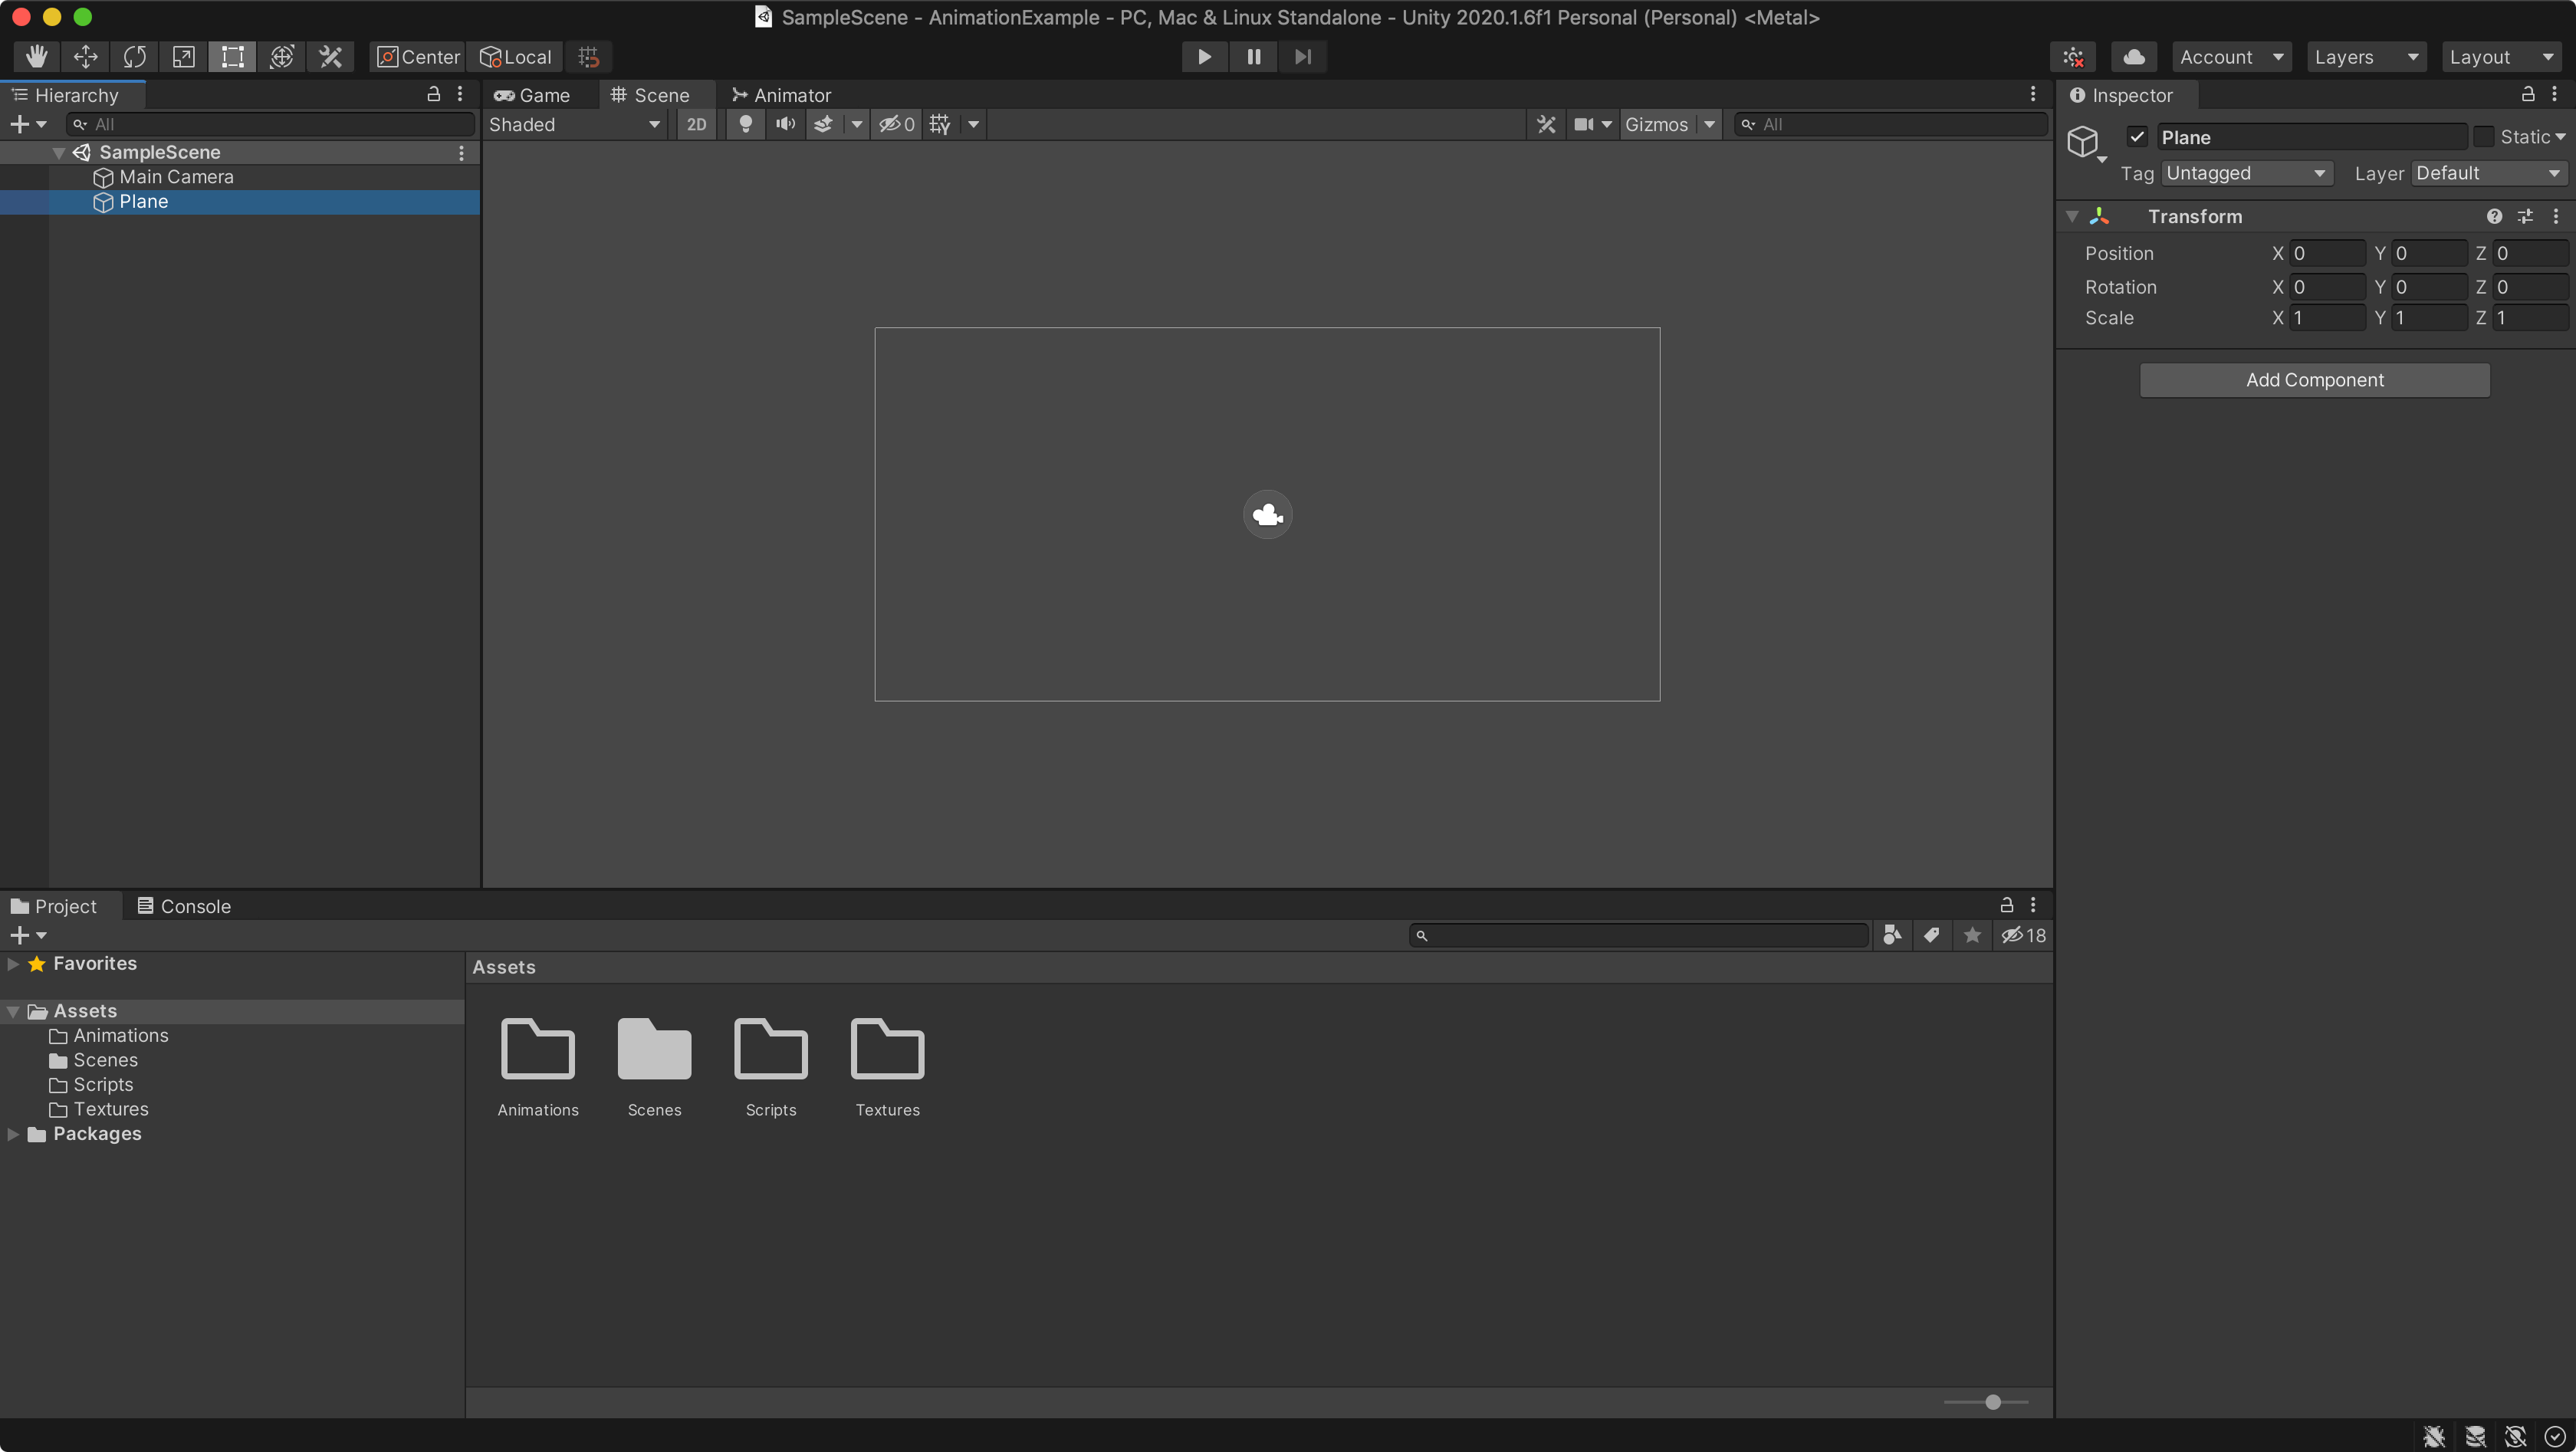 Animate Spritesheets in a Unity 2D Game